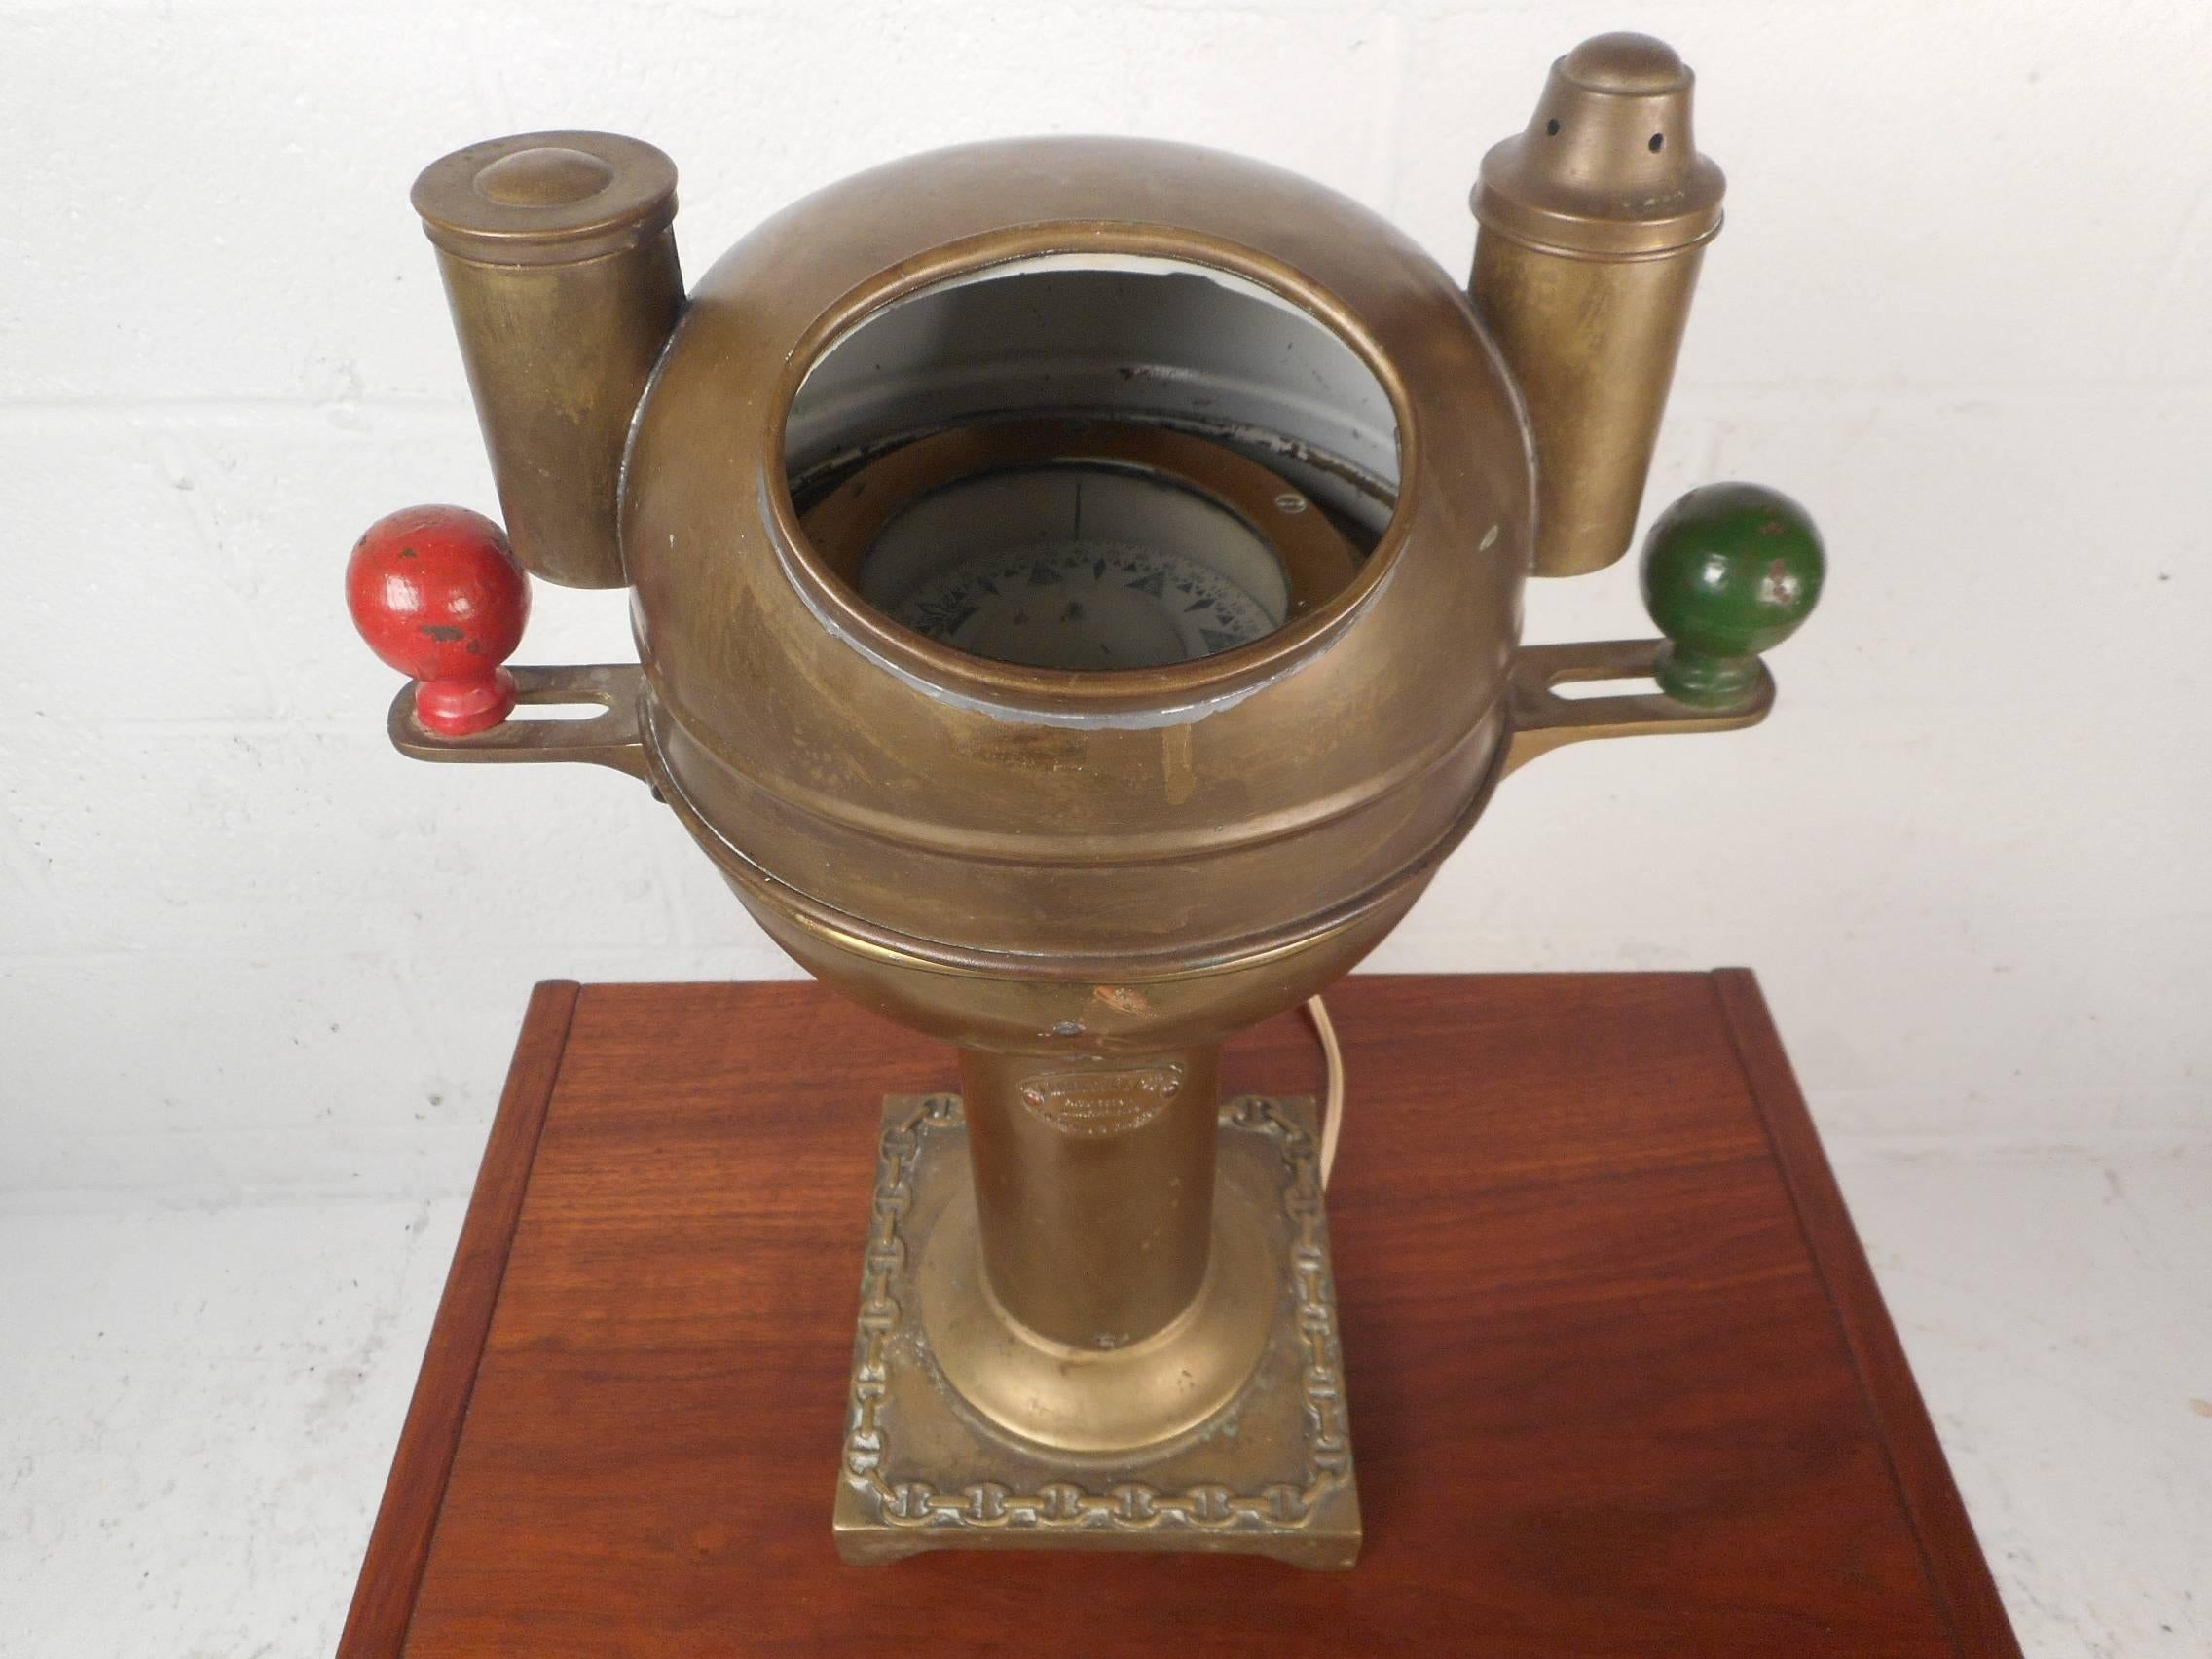 This stunning antique brass binnacle compass makes the perfect nautical decoration in any home, business, or office. This beautiful piece has a removable top with a small light bulb inside meant to illuminate the interior enough to see the compass.